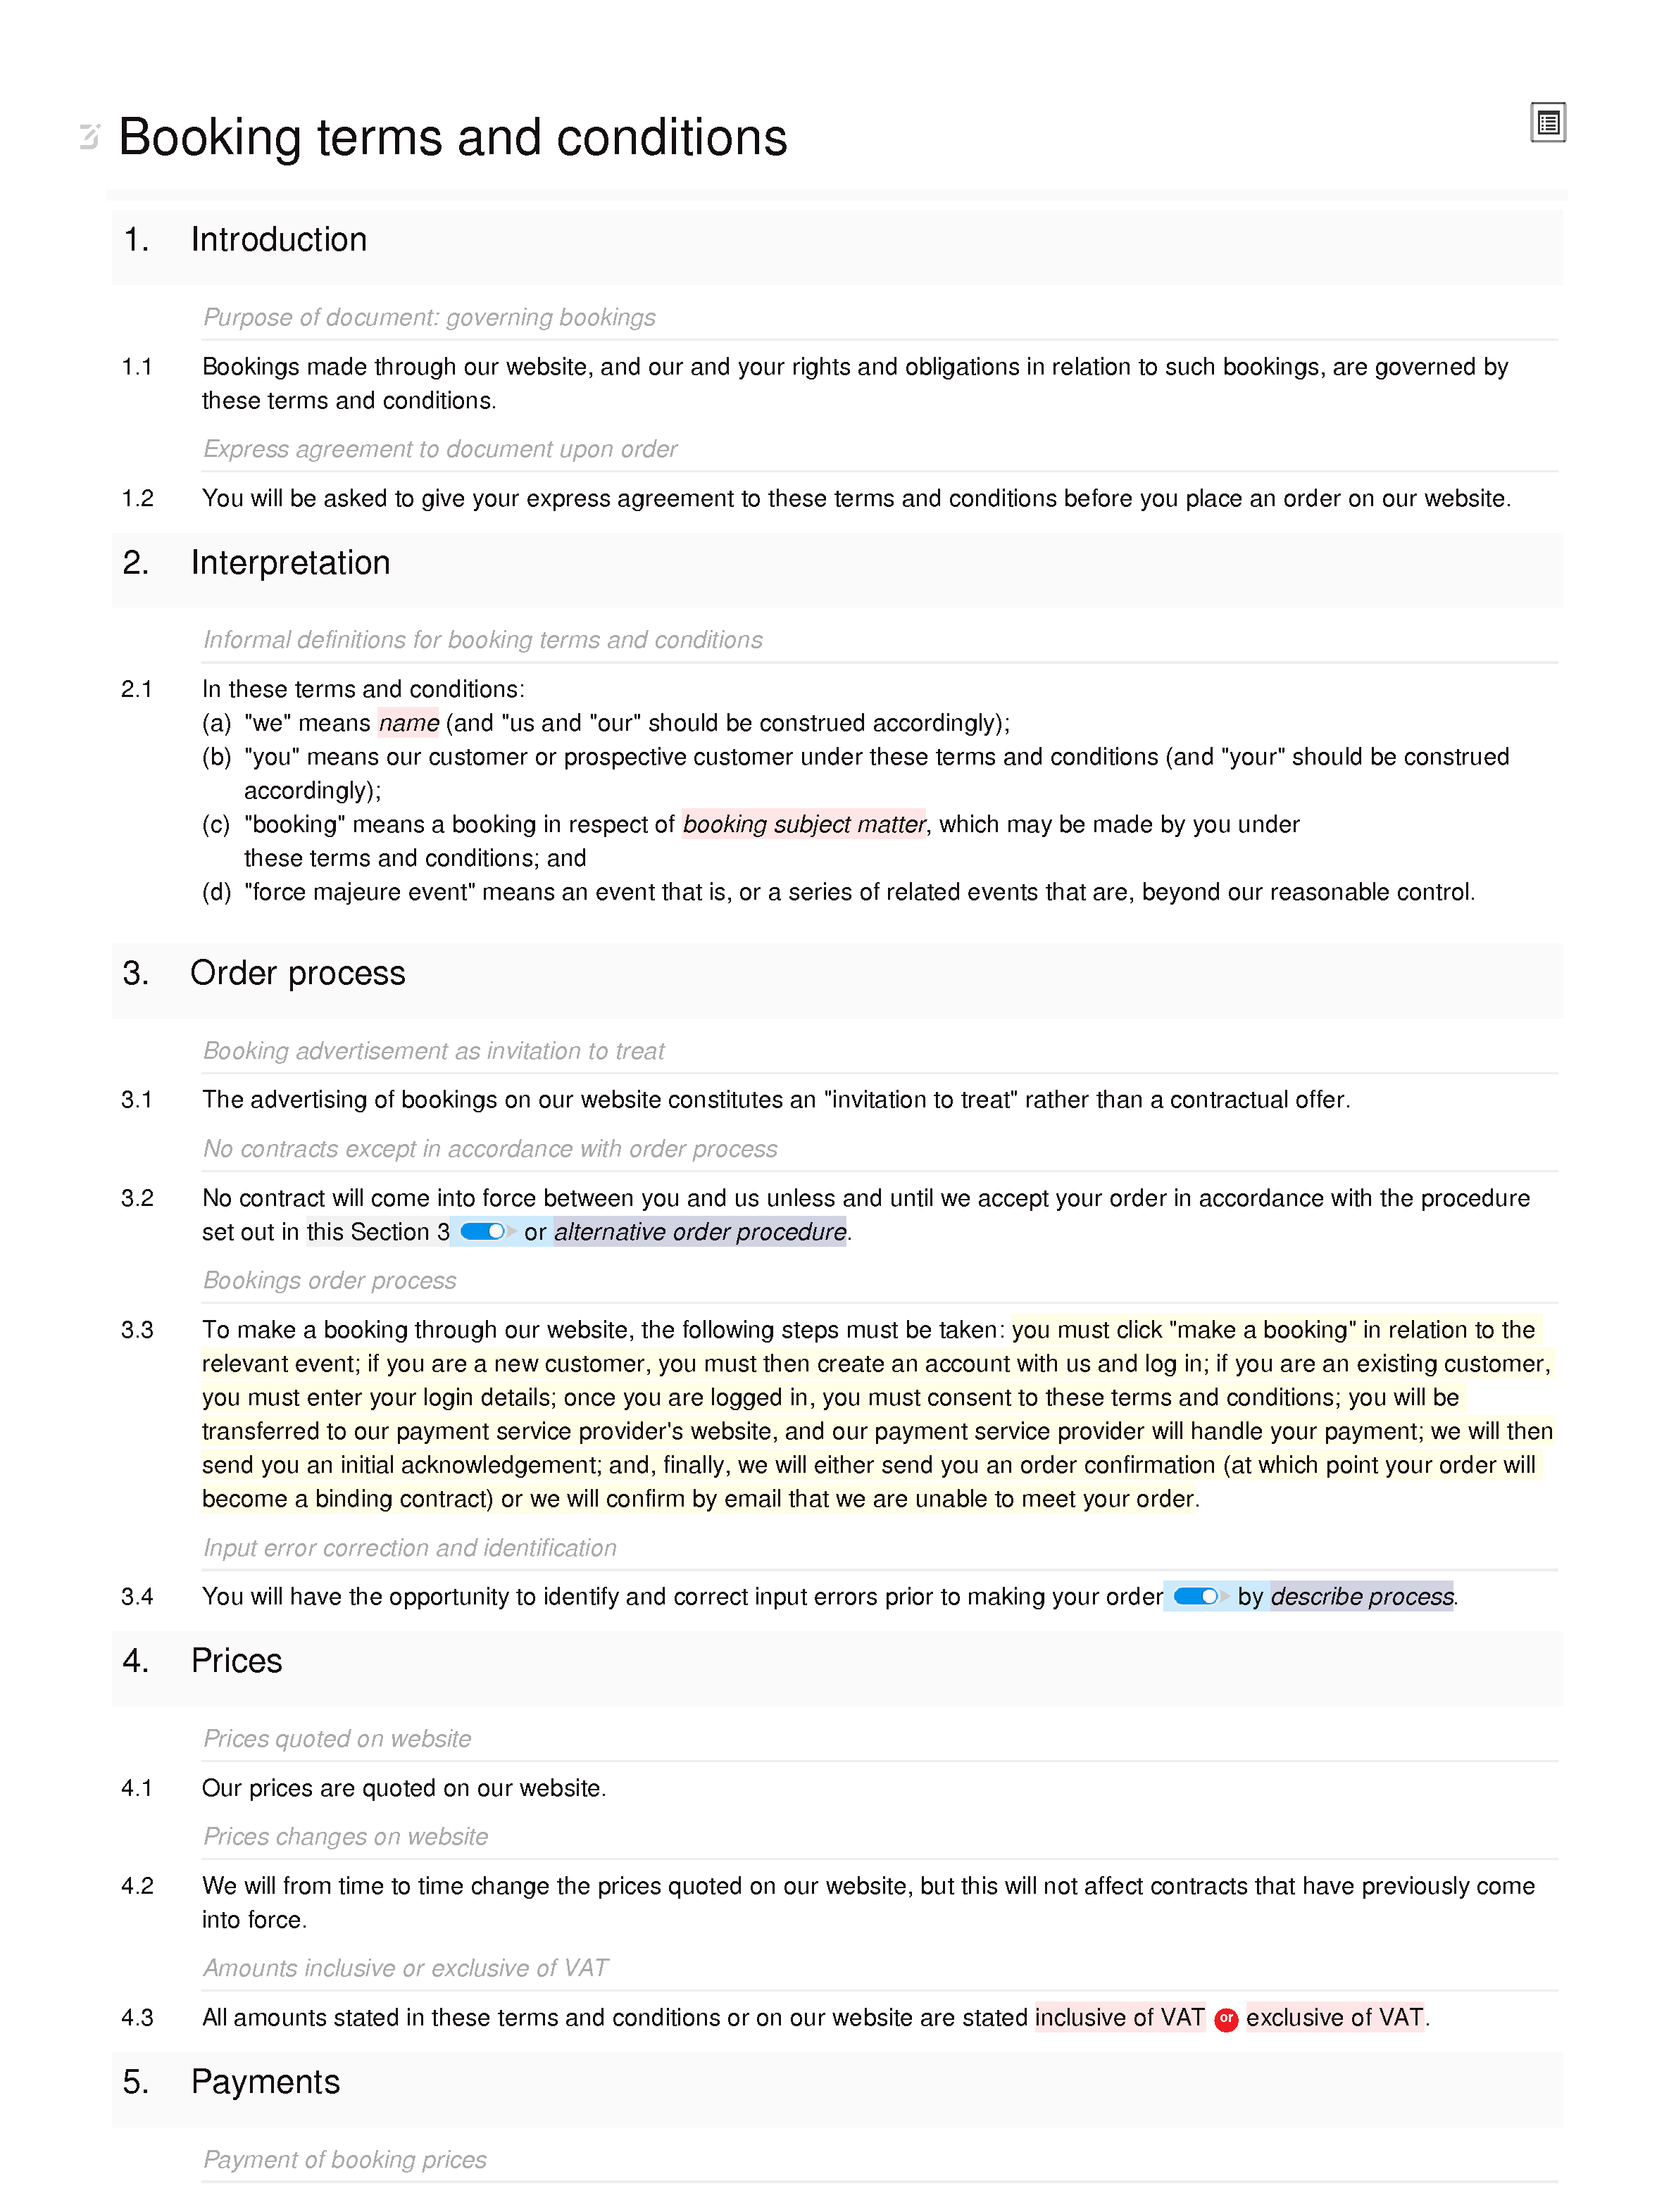 Online booking terms and conditions (B2B) document editor preview